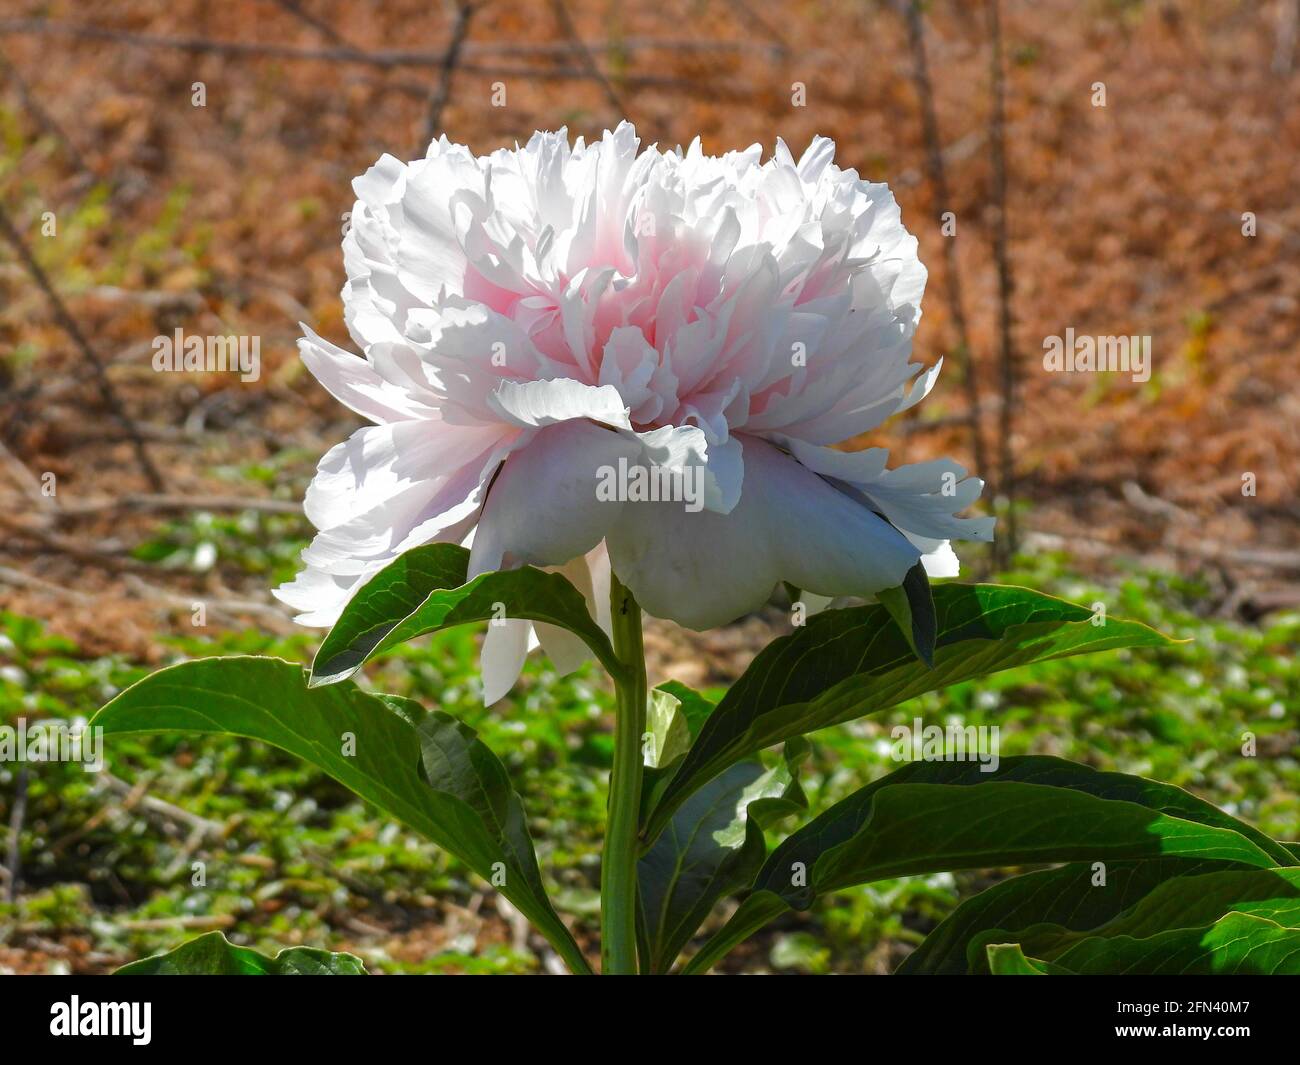 Close-up of pale pink peony head against green foliage background Stock Photo